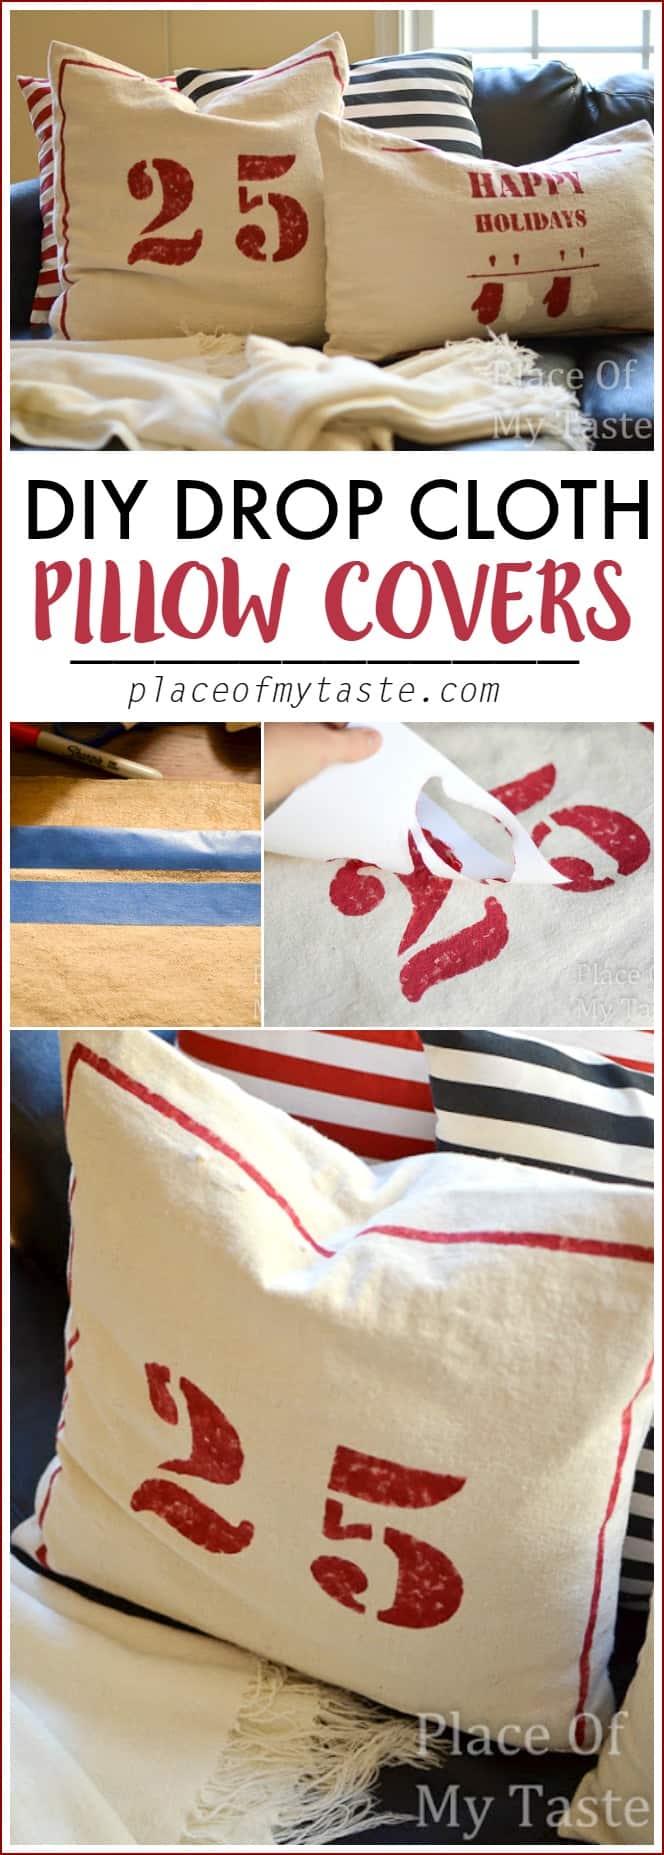 DIY Drop cloth pillow covers ! Ahmazing project for the Holidays!